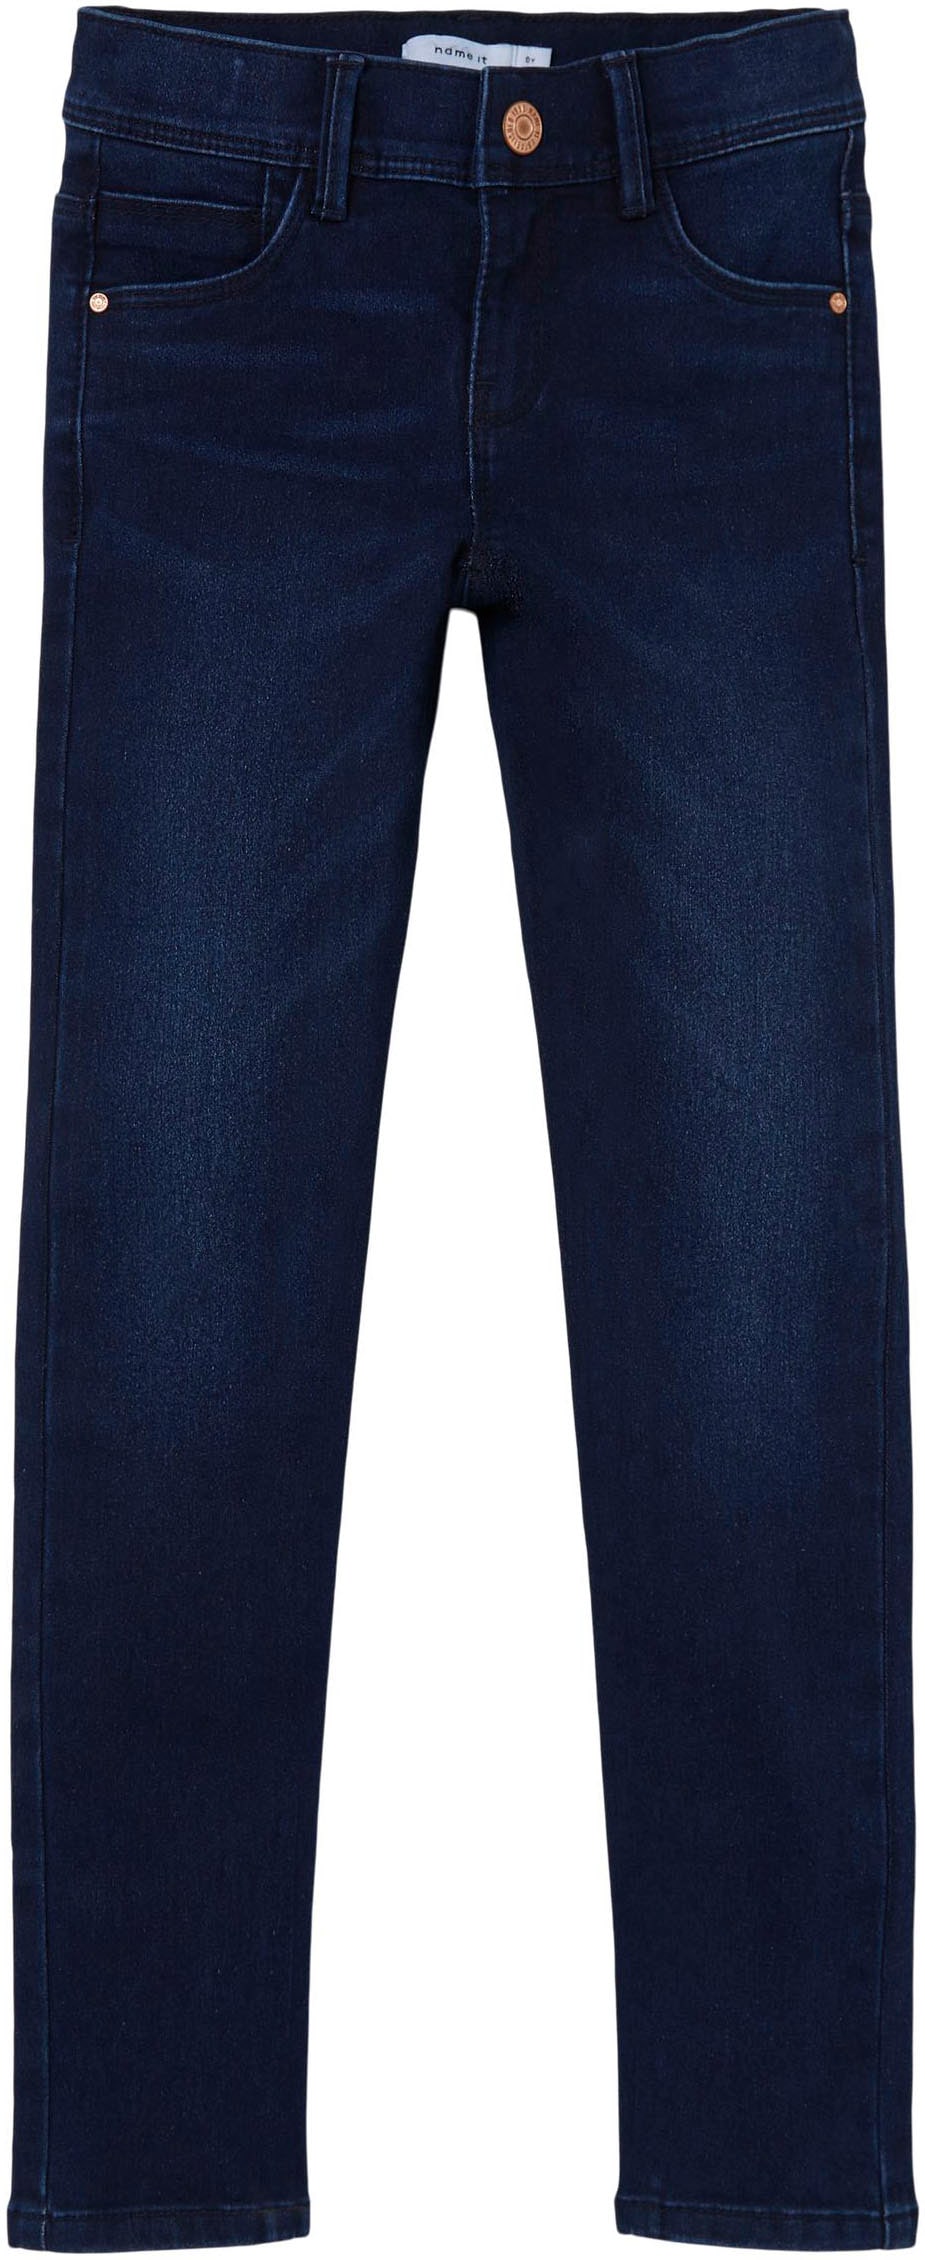 Name It Stretch-Jeans »NKFPOLLY bei Stretchdenim DNMTAX ♕ aus bequemem PANT«